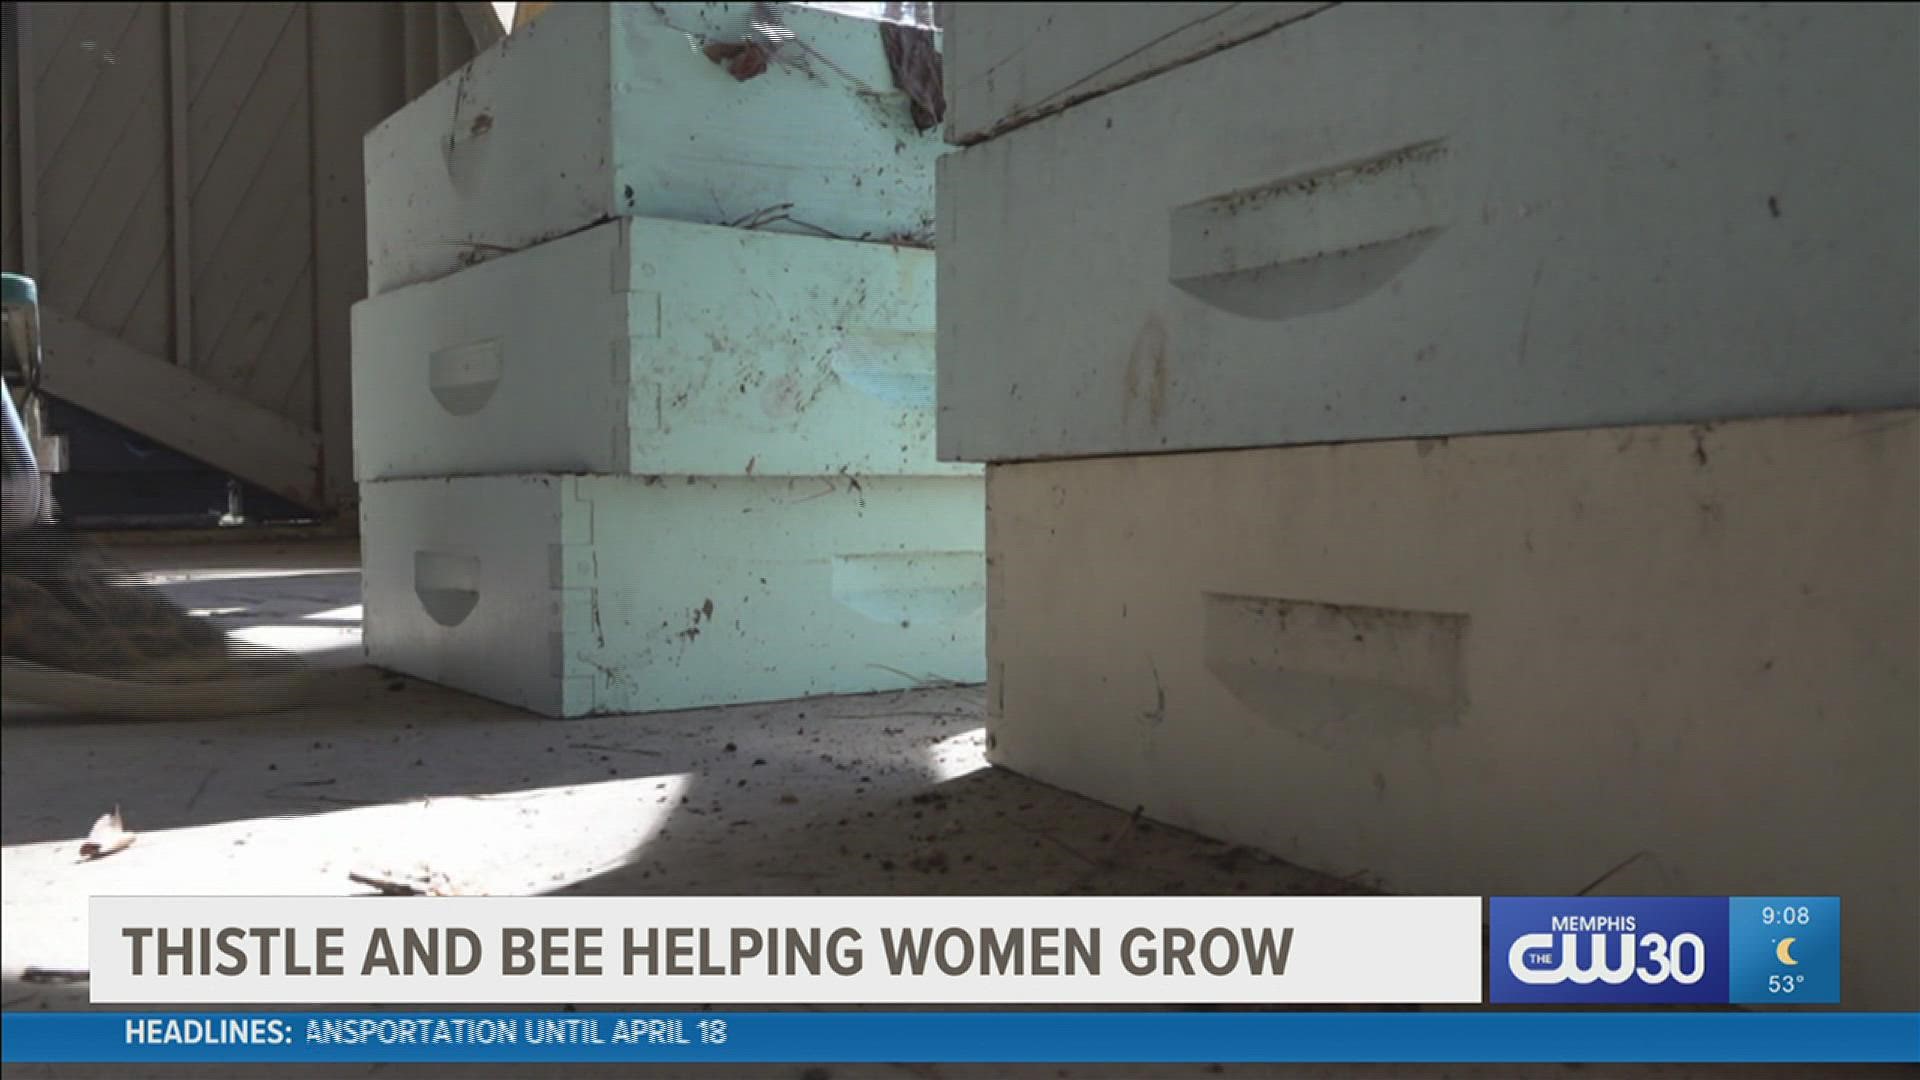 Thistle and Bee provides a safe environment so women can focus on moving their lives forward.